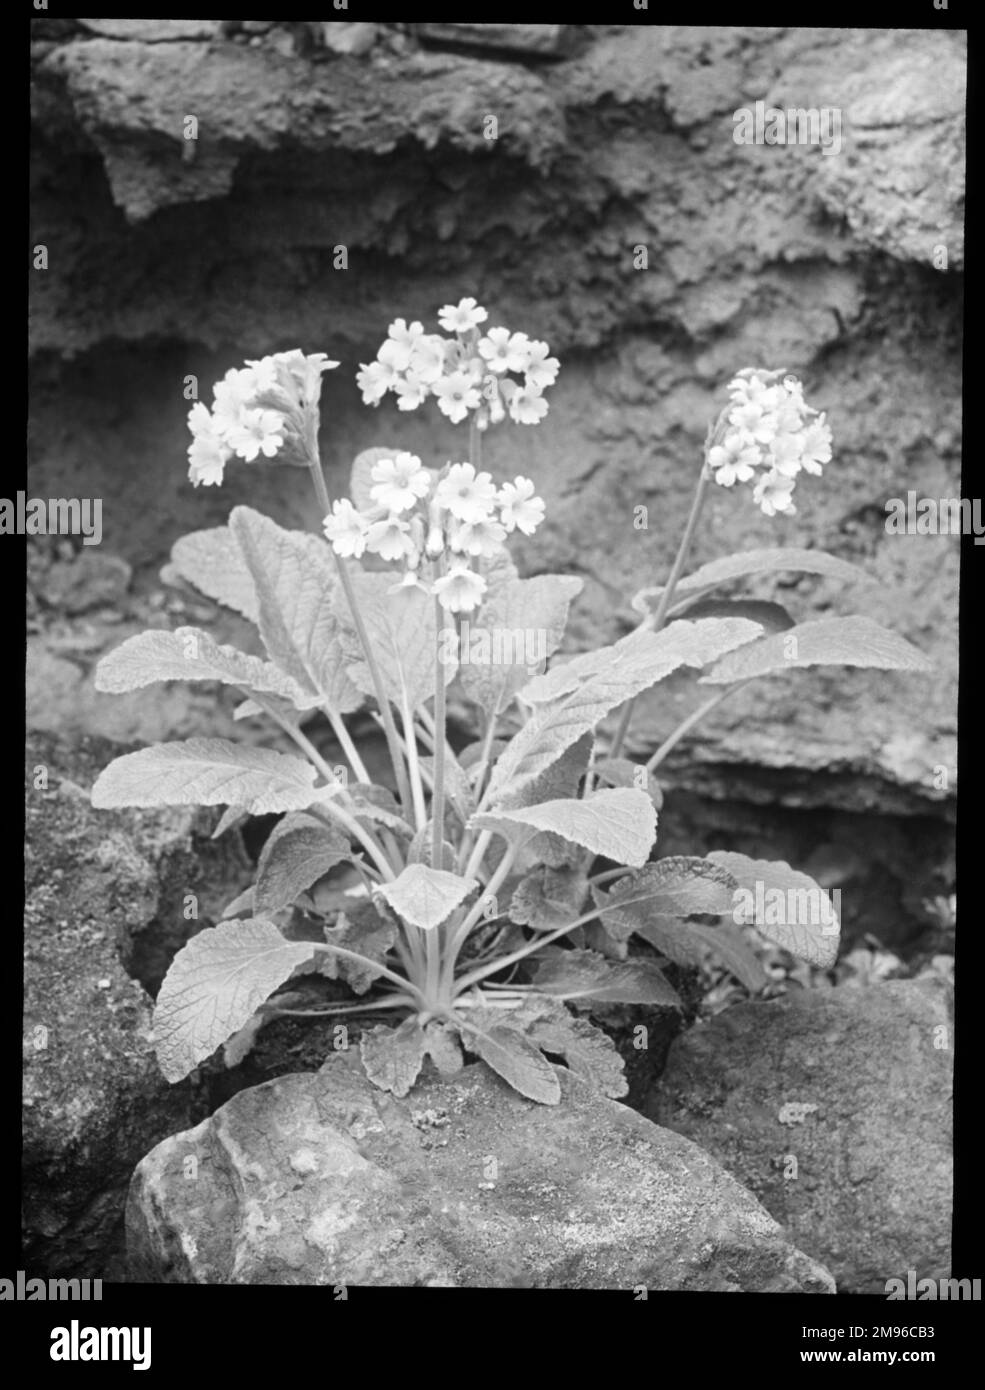 Primula Forrestii (Forest Primrose), a flowering perennial of the Primulaceae family with a bright yellow flower, native to China.  The Latin name primula refers to flowers that are among the first to open in spring. Seen here growing in a rocky setting. Stock Photo